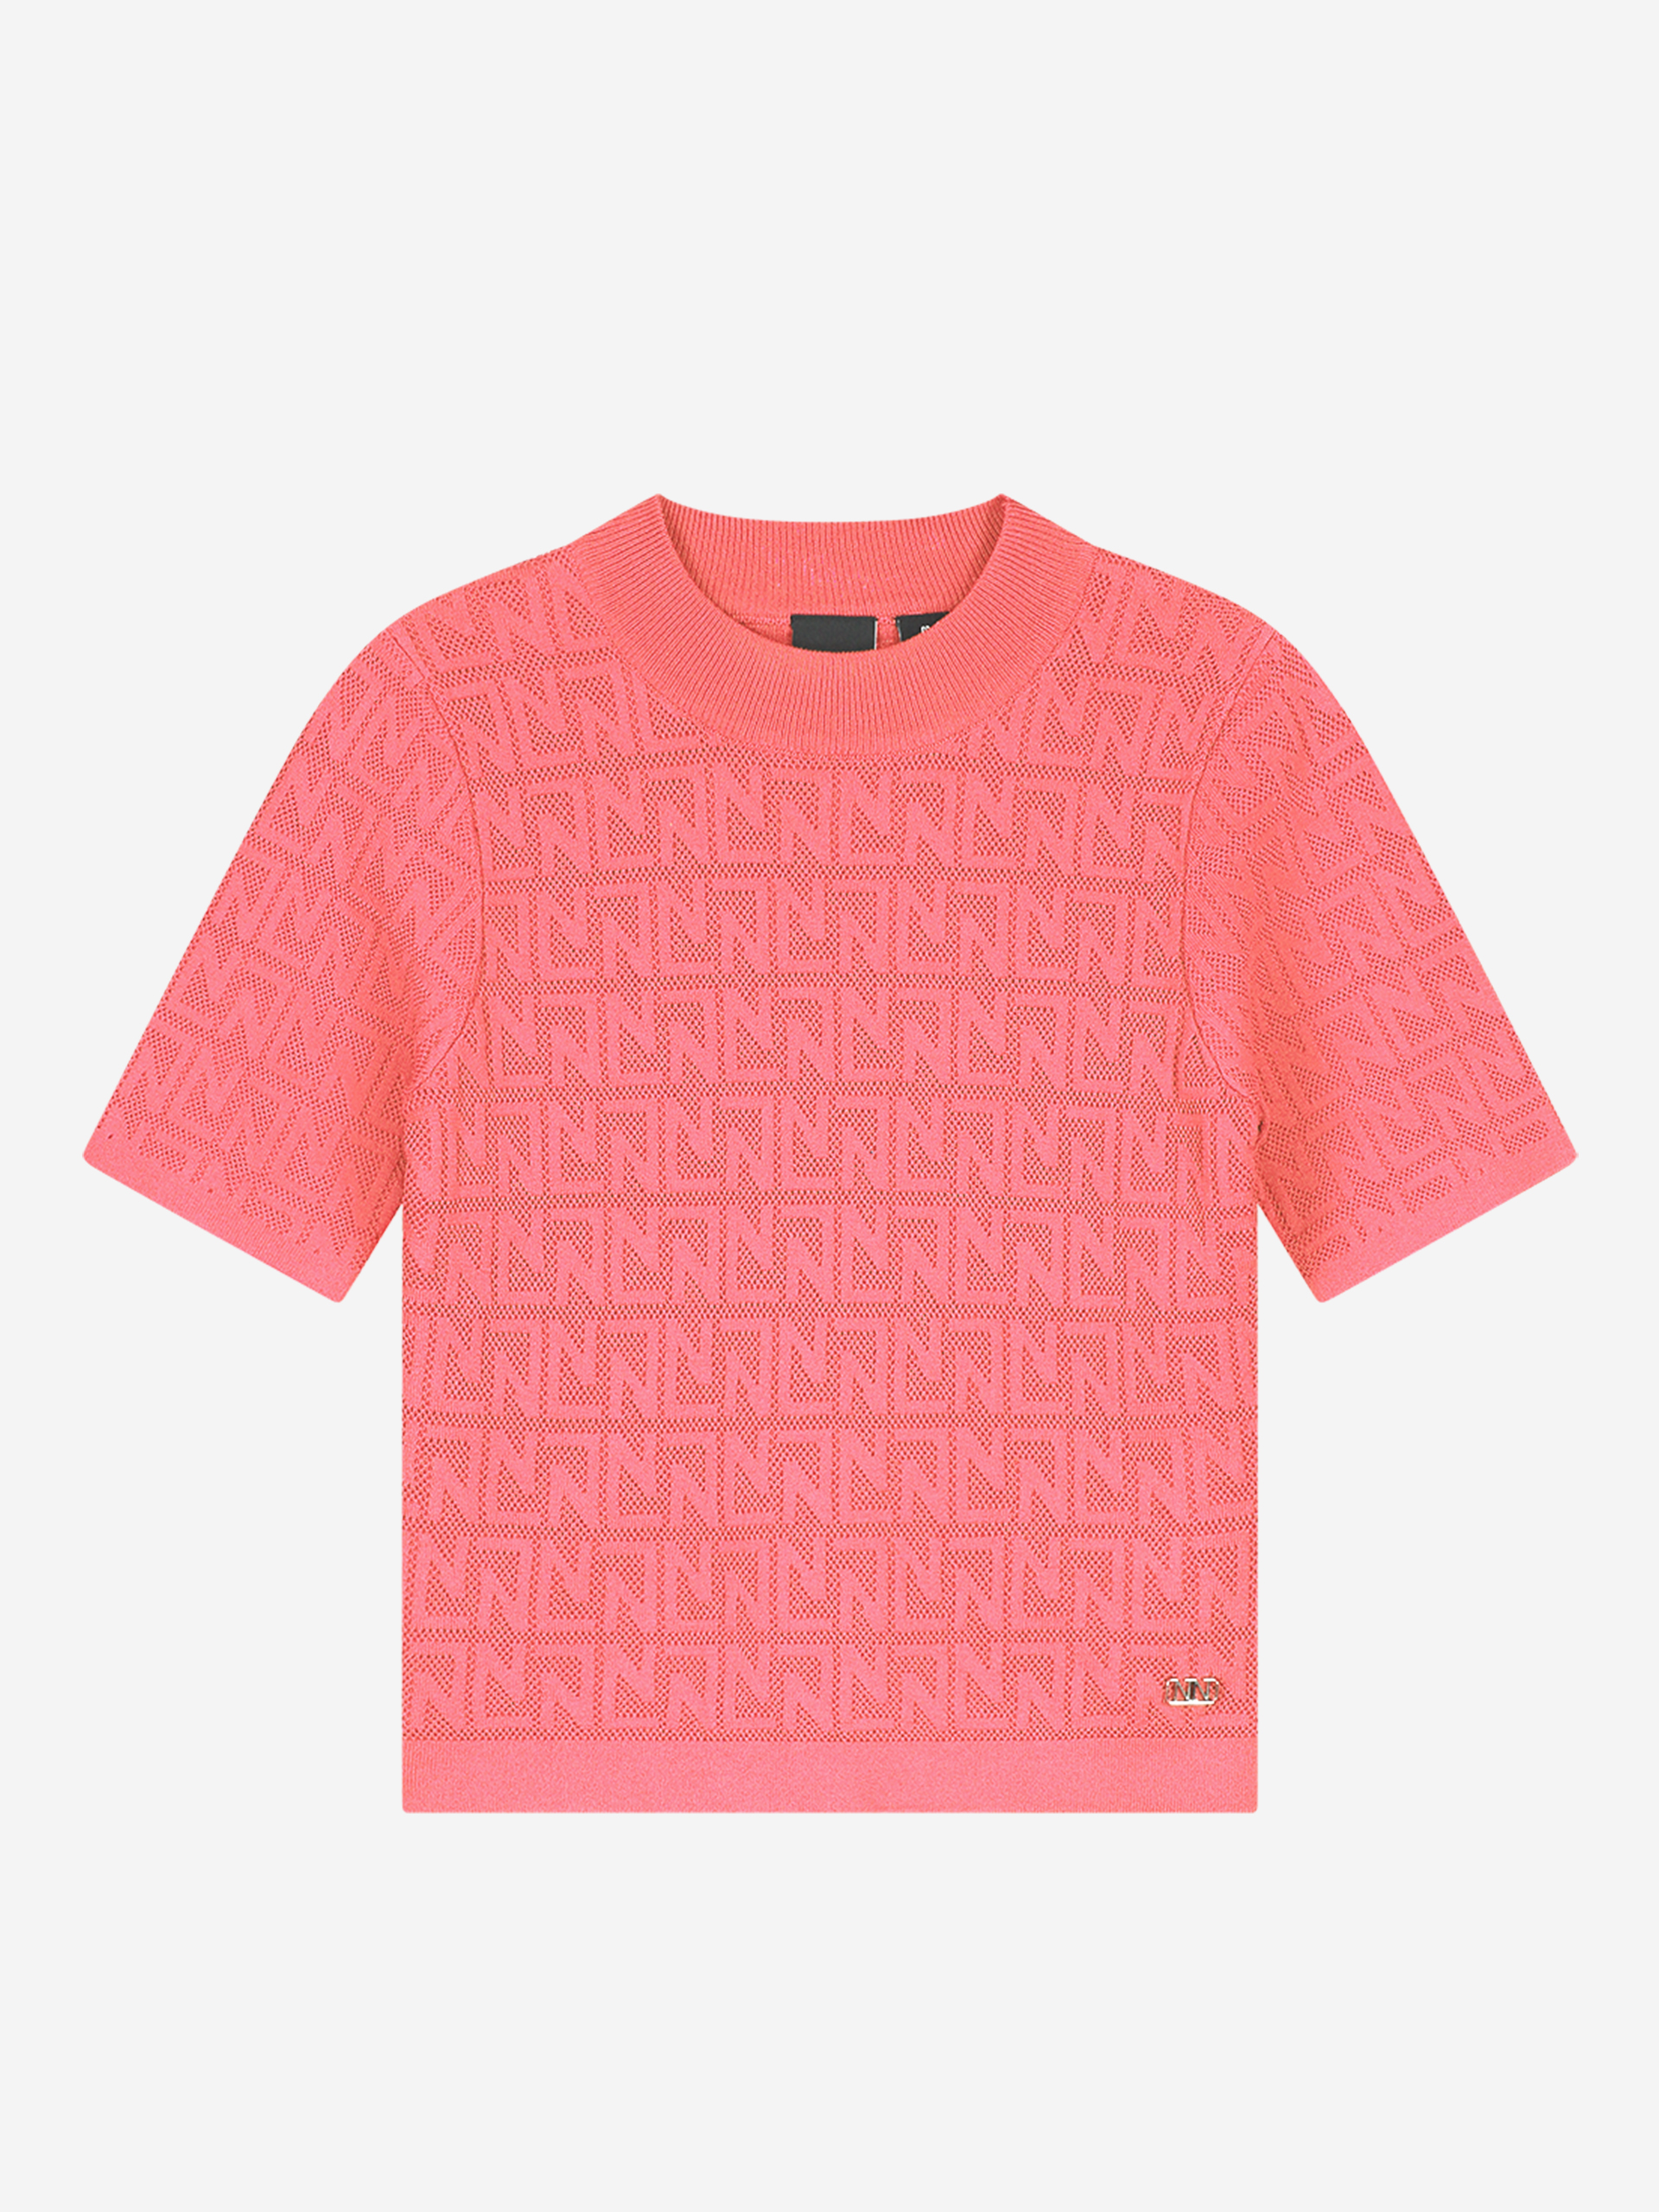  Fitted top with N&N all-over print